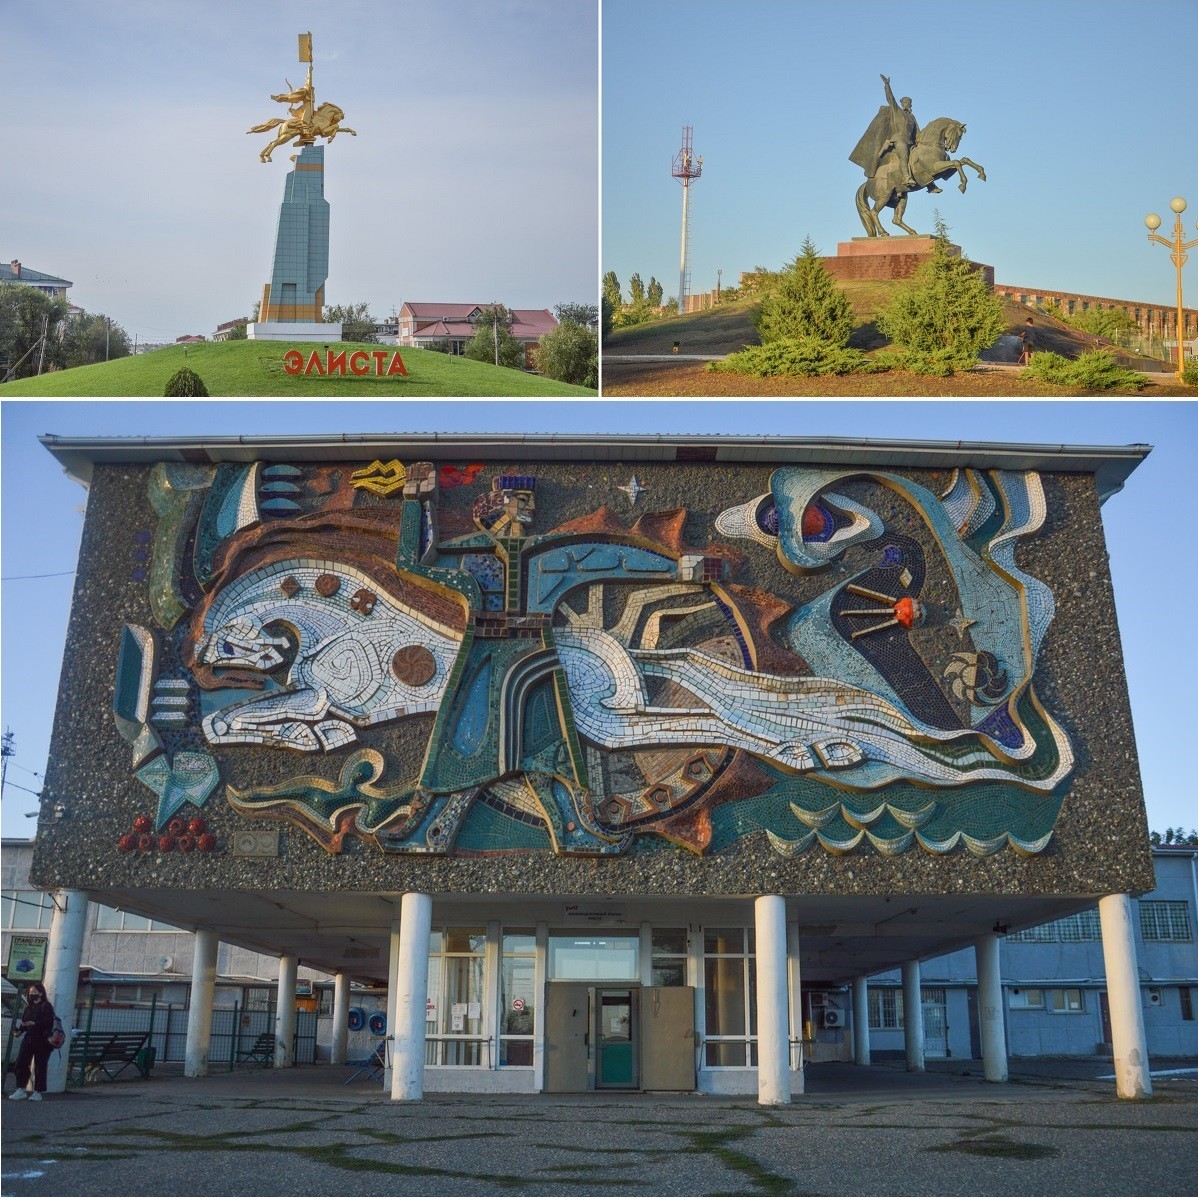 The horse, a symbol of nomadism, is omnipresent in Elista, whether in statues or in a sublime Soviet mosaic on the facade of the railway station.